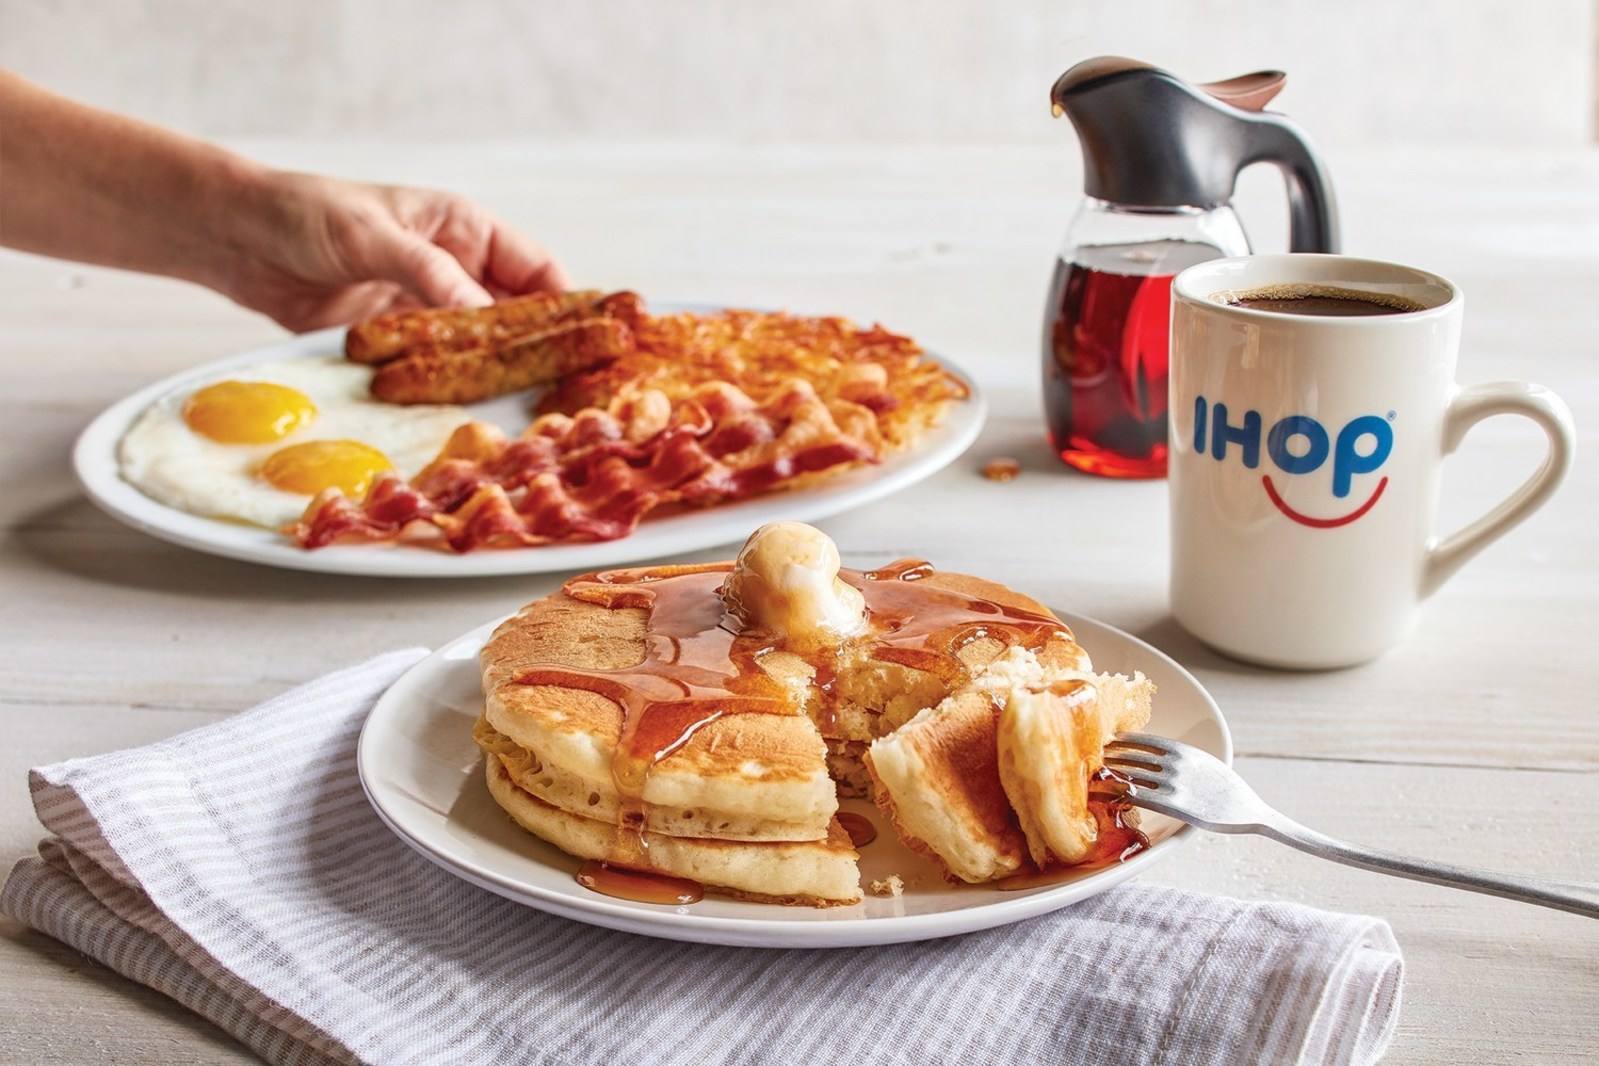 IHOP Launches AllYouCanEat Pancakes for 3.99